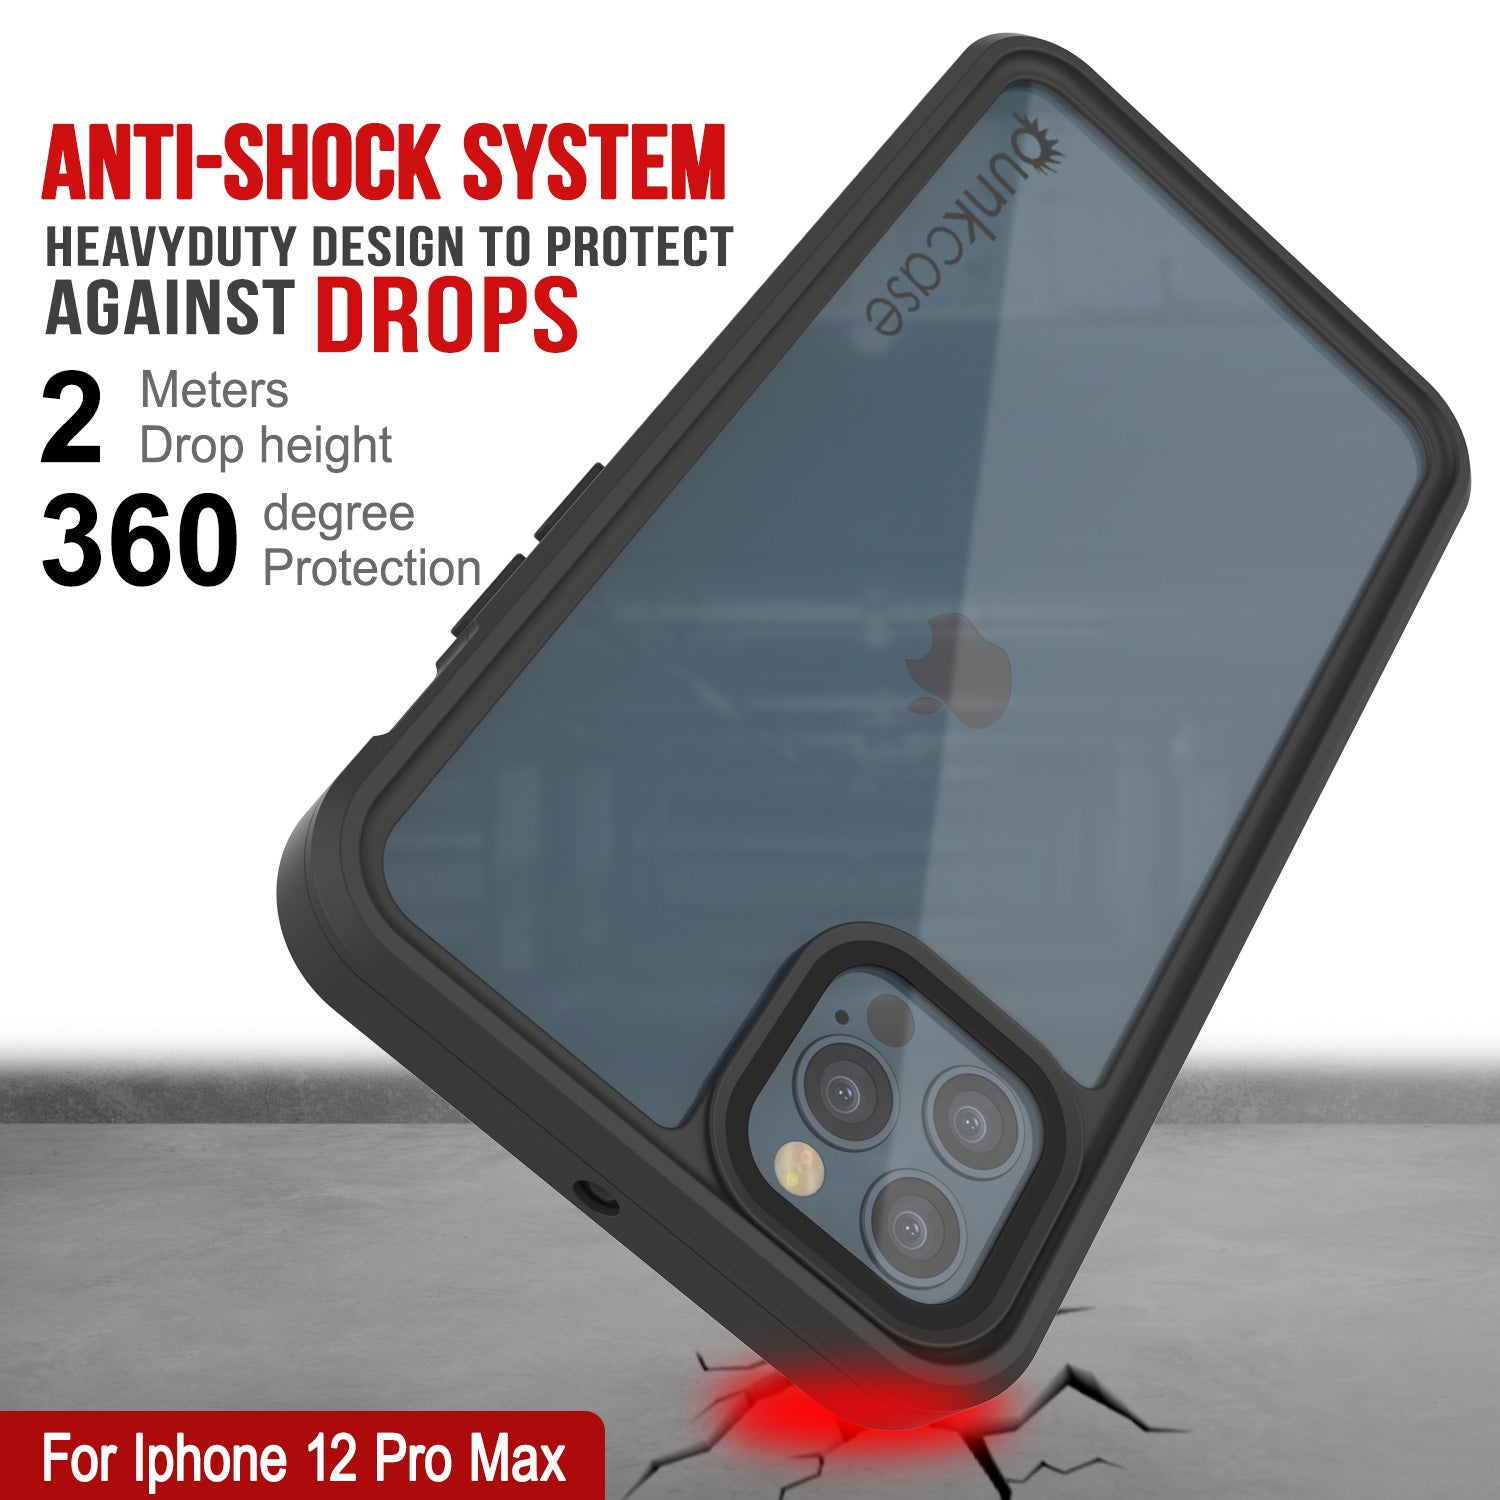 iPhone 13 Pro Max Waterproof Case, Punkcase [Extreme Series] Armor Cover W/  Built In Screen Protector [Black]